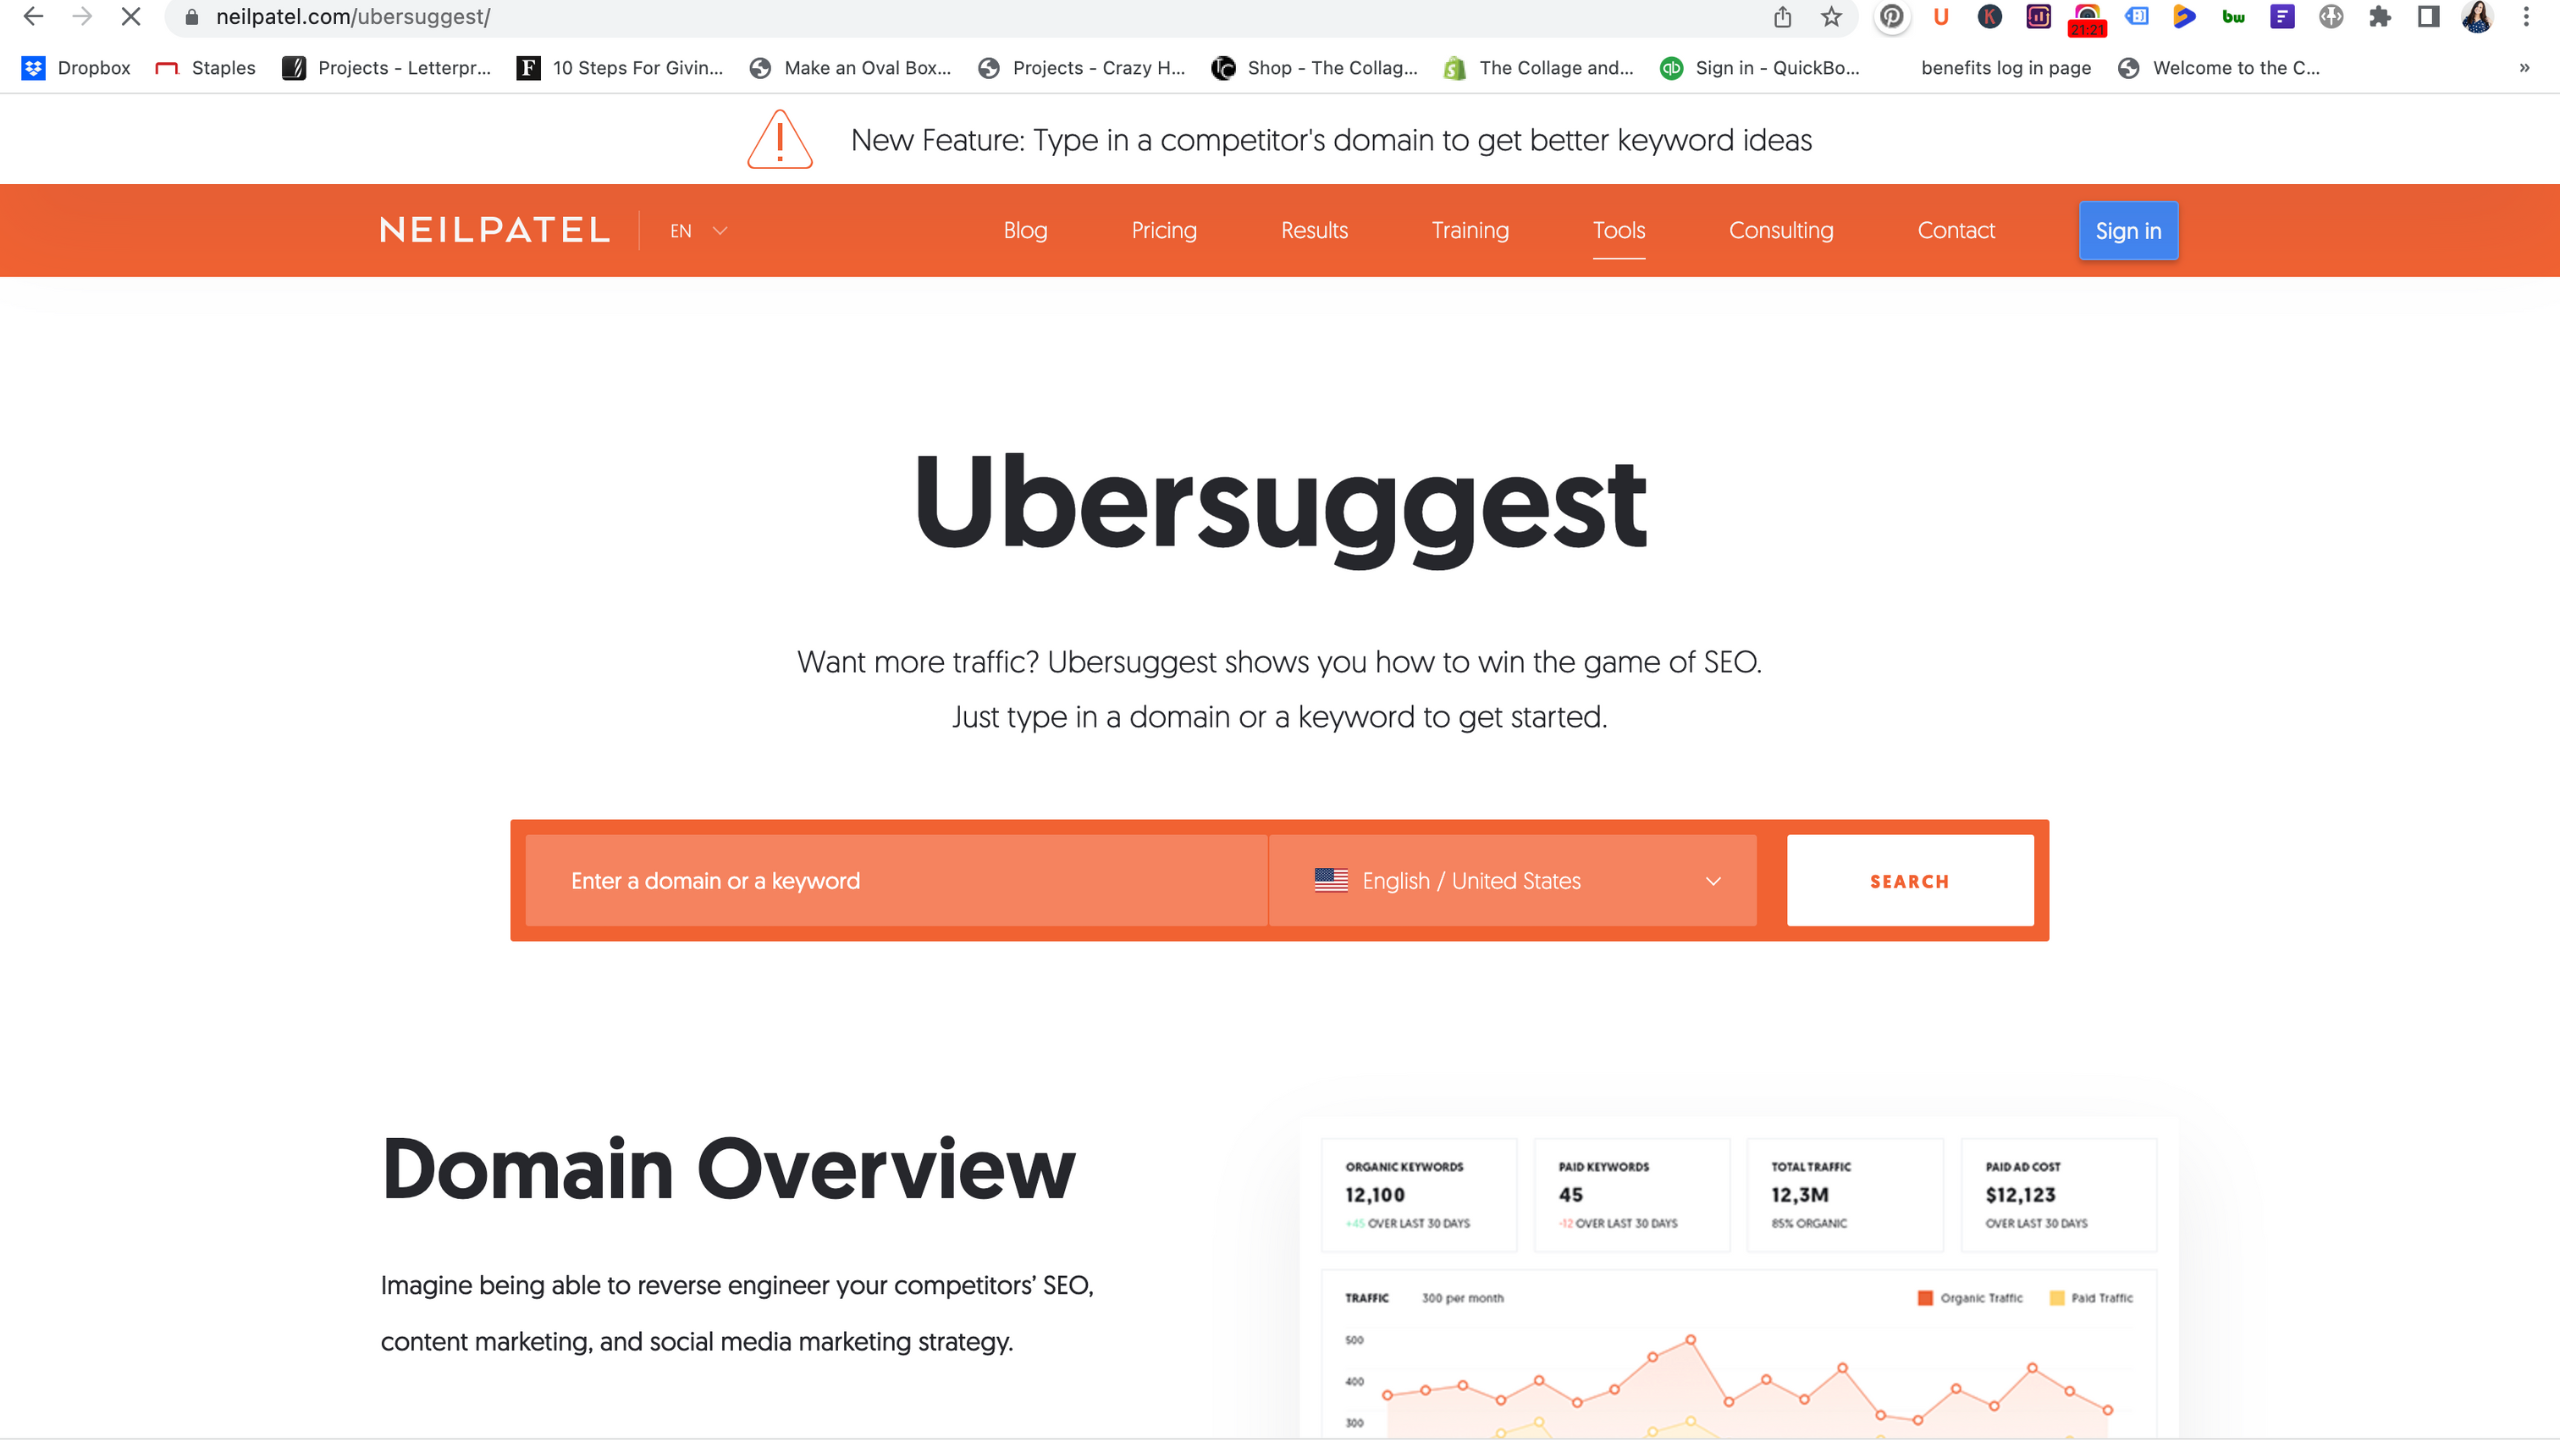 UberSuggest provides you with a rank tracker and competitor research, and some features are completely free.